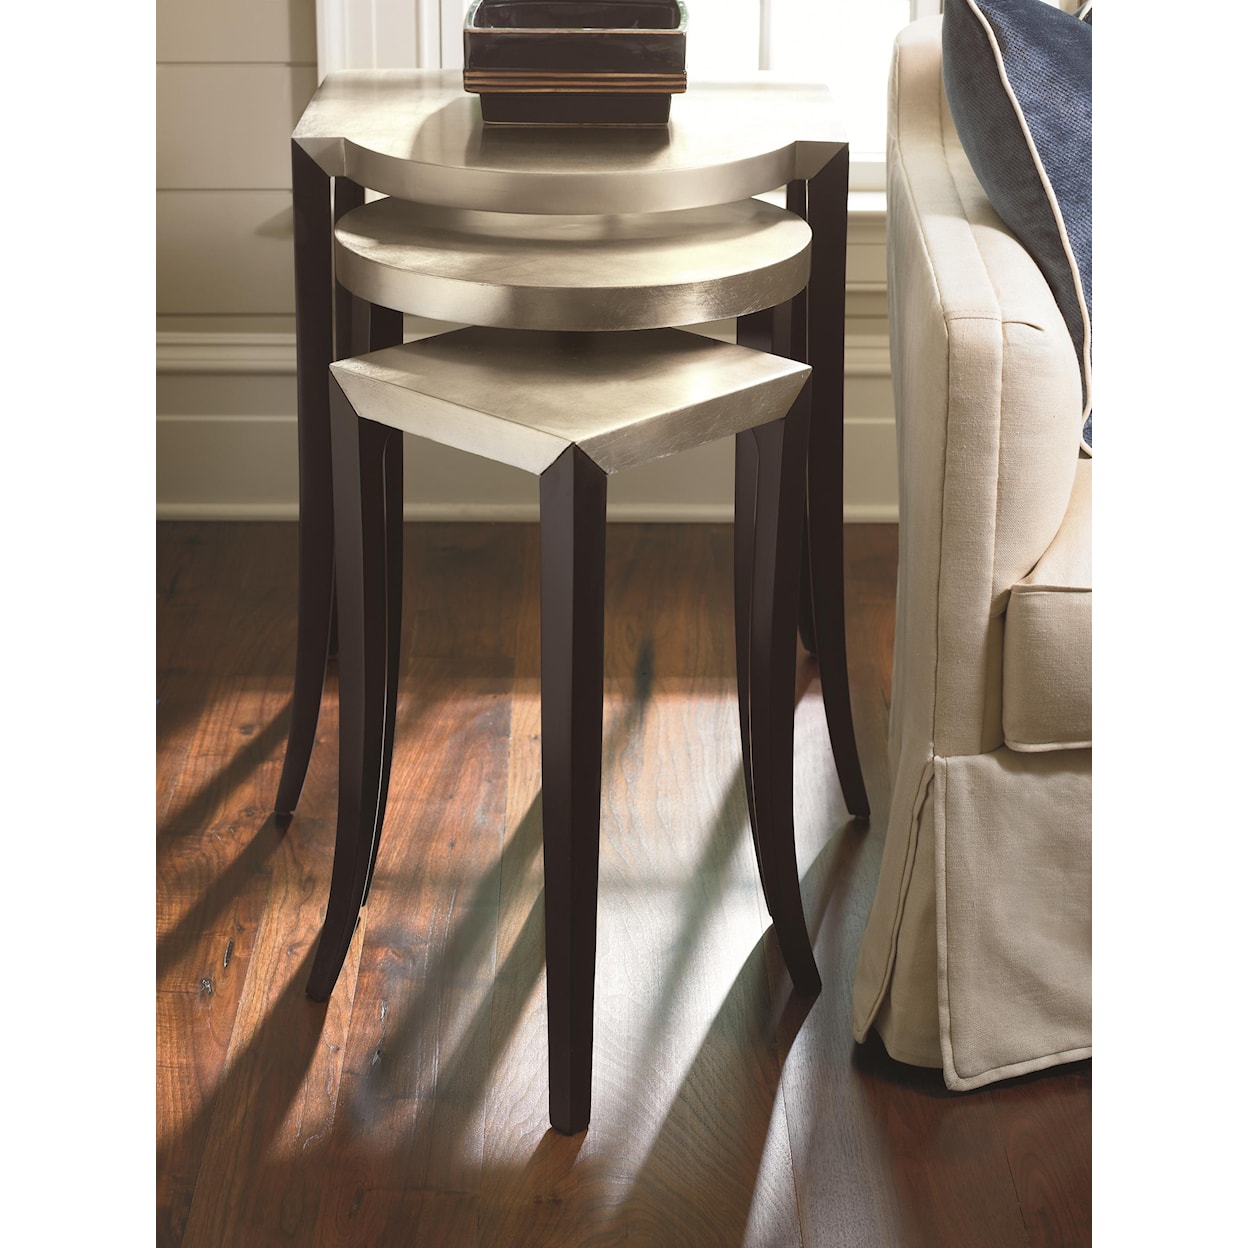 Caracole Caracole Classic "Out & About" Nesting Tables